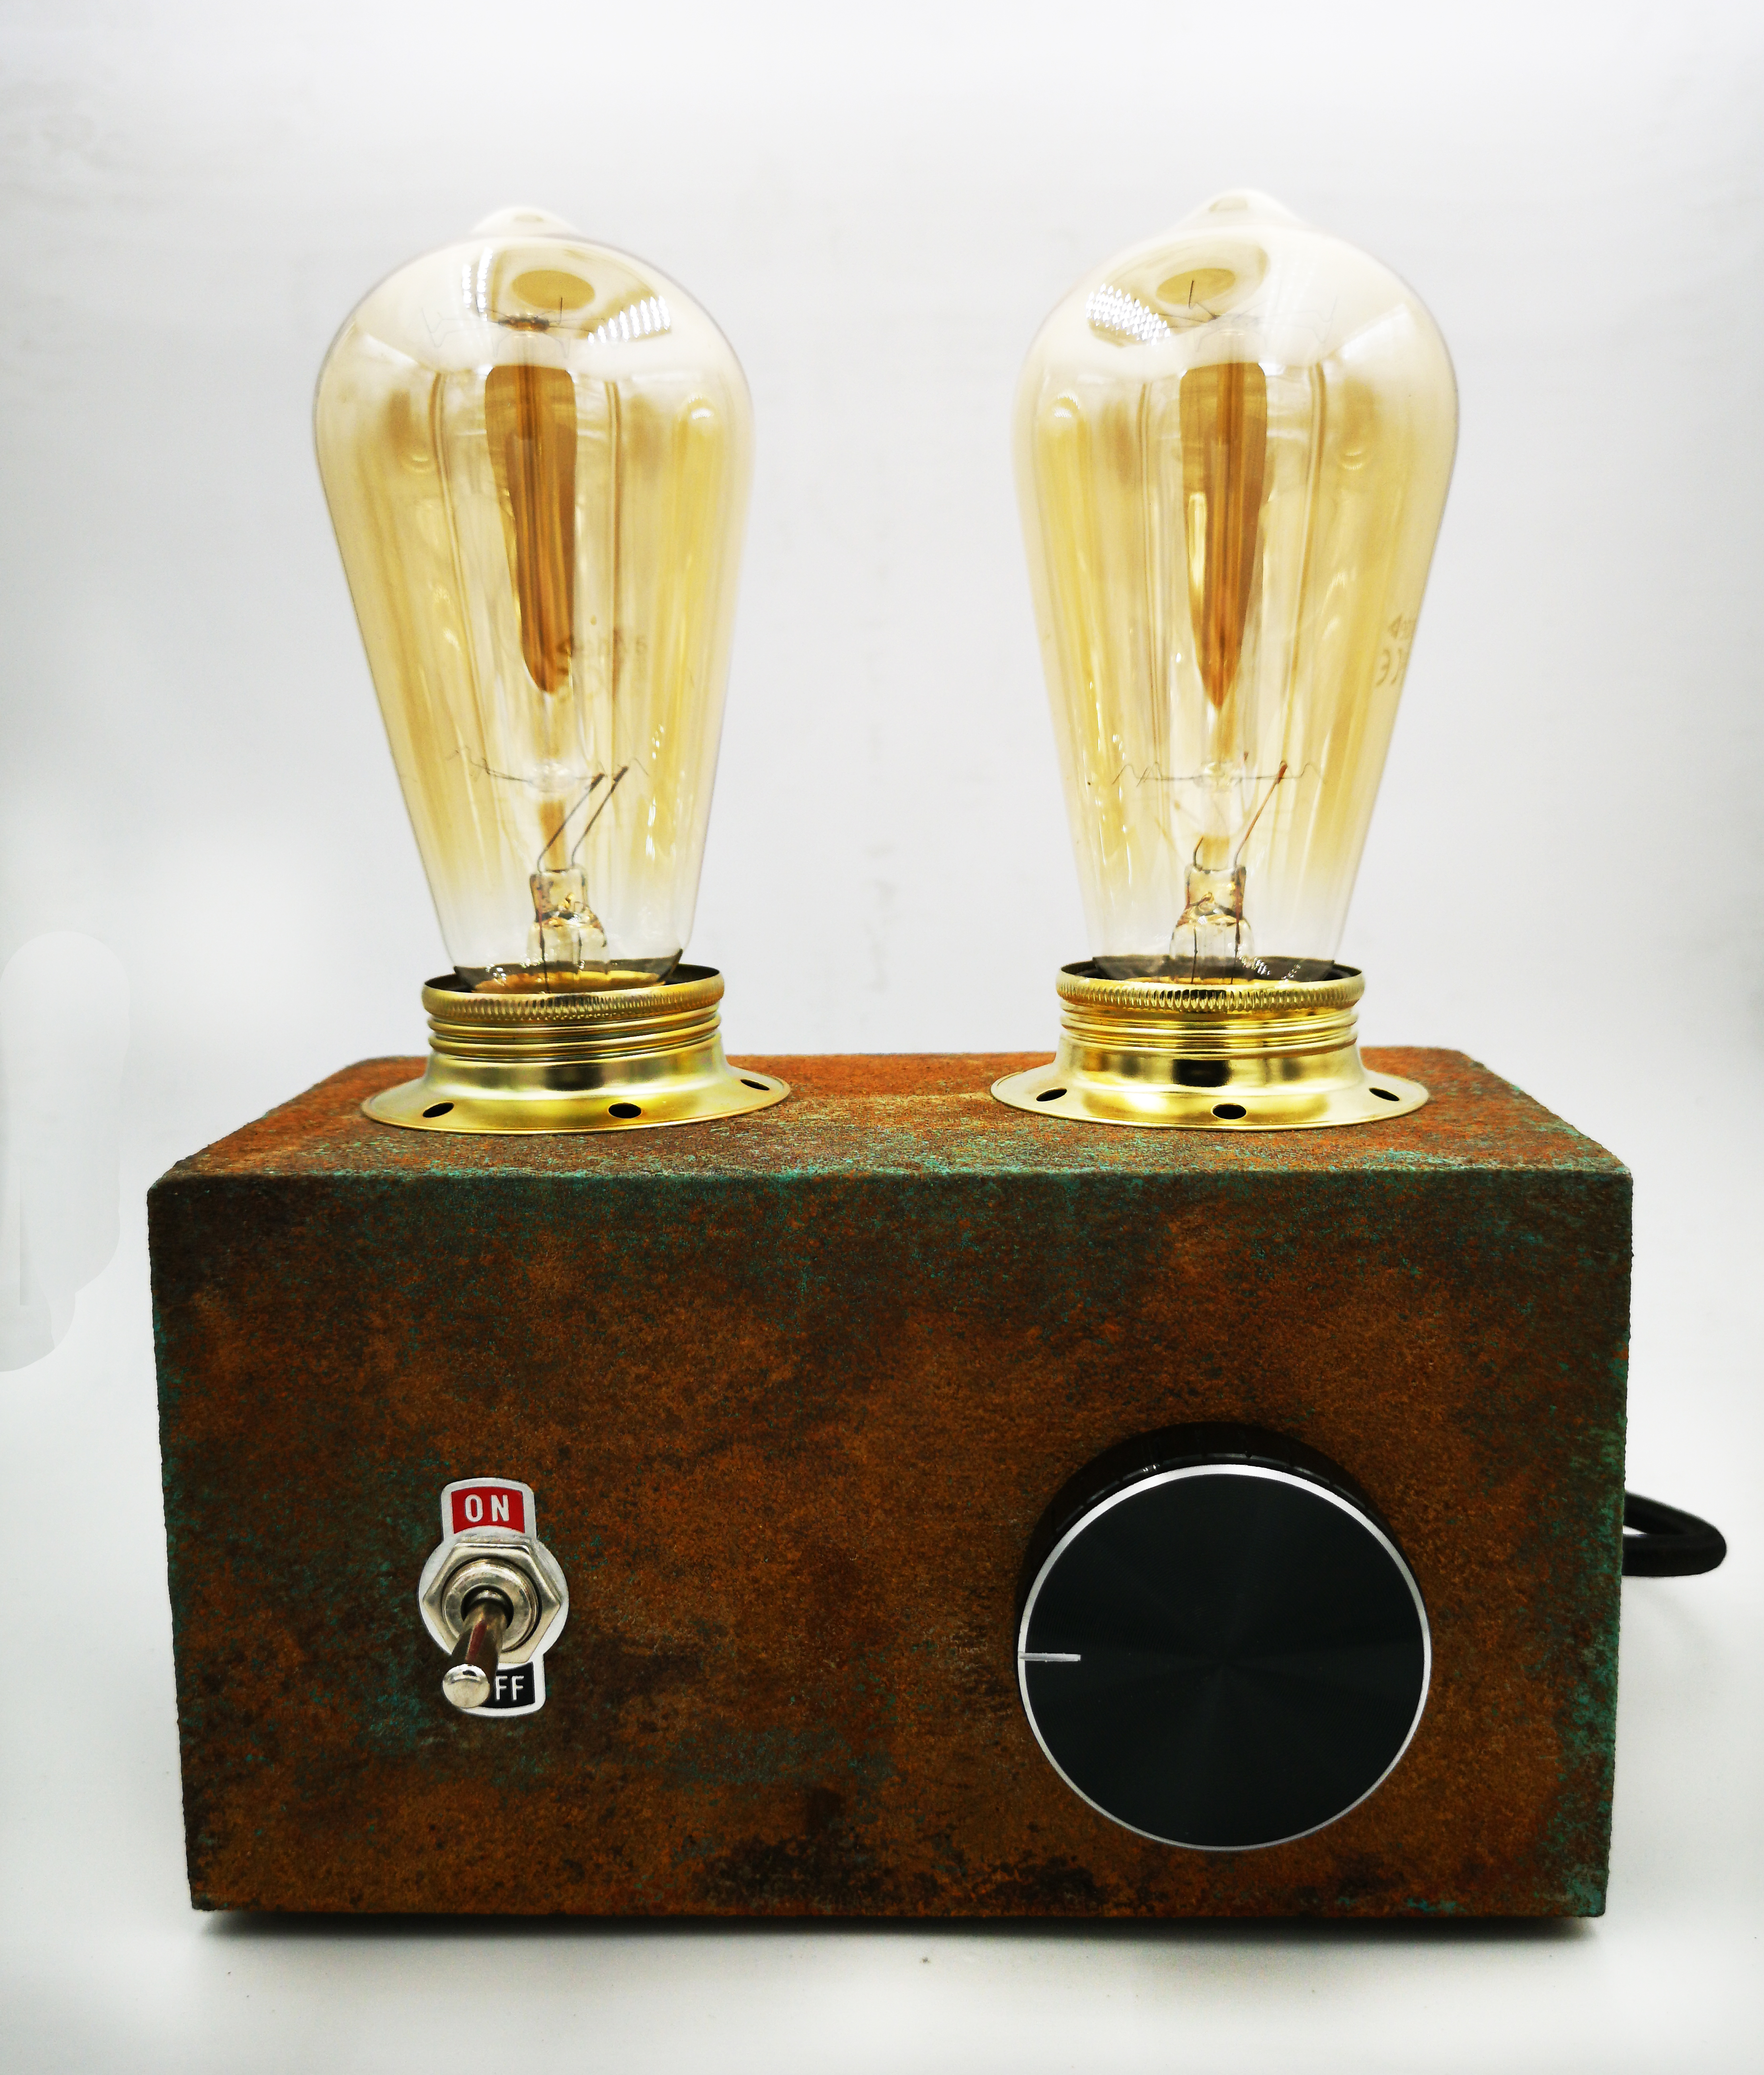 PATINA RADIO EDISON made with concret, two bulbs and a dimming button.